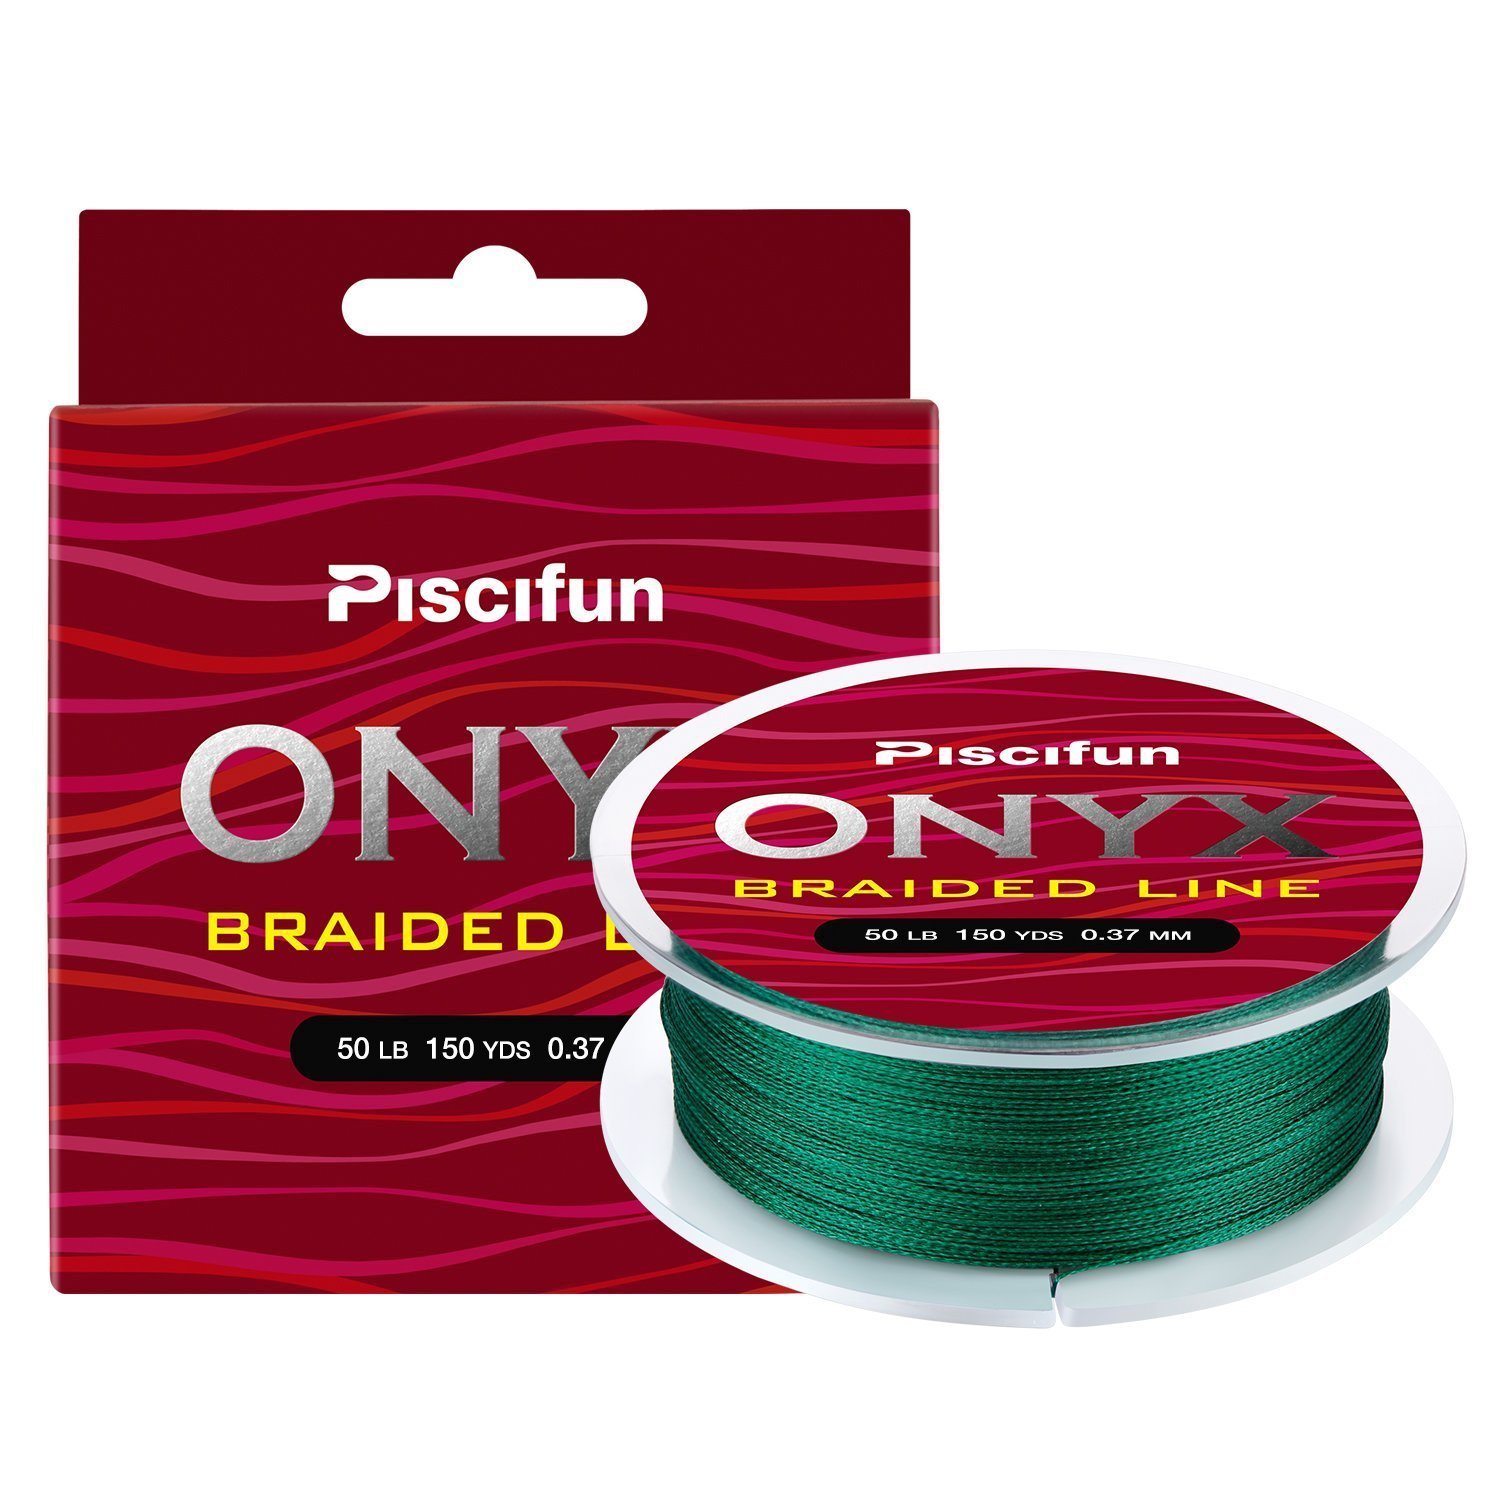 Best Braided Fishing Lines